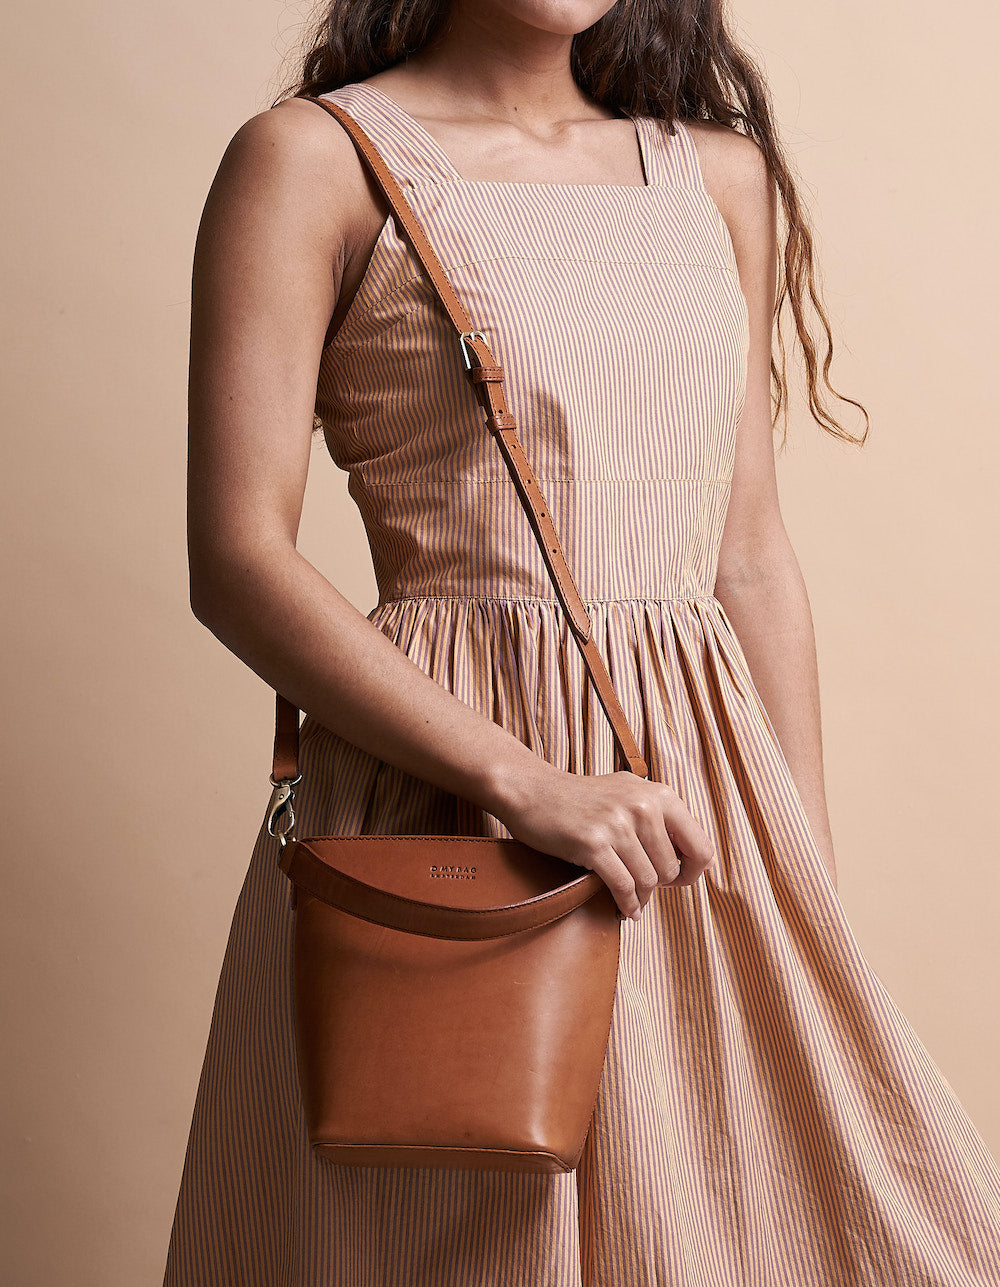 Small Cognac Bucket bag. Removable straps. Model product image